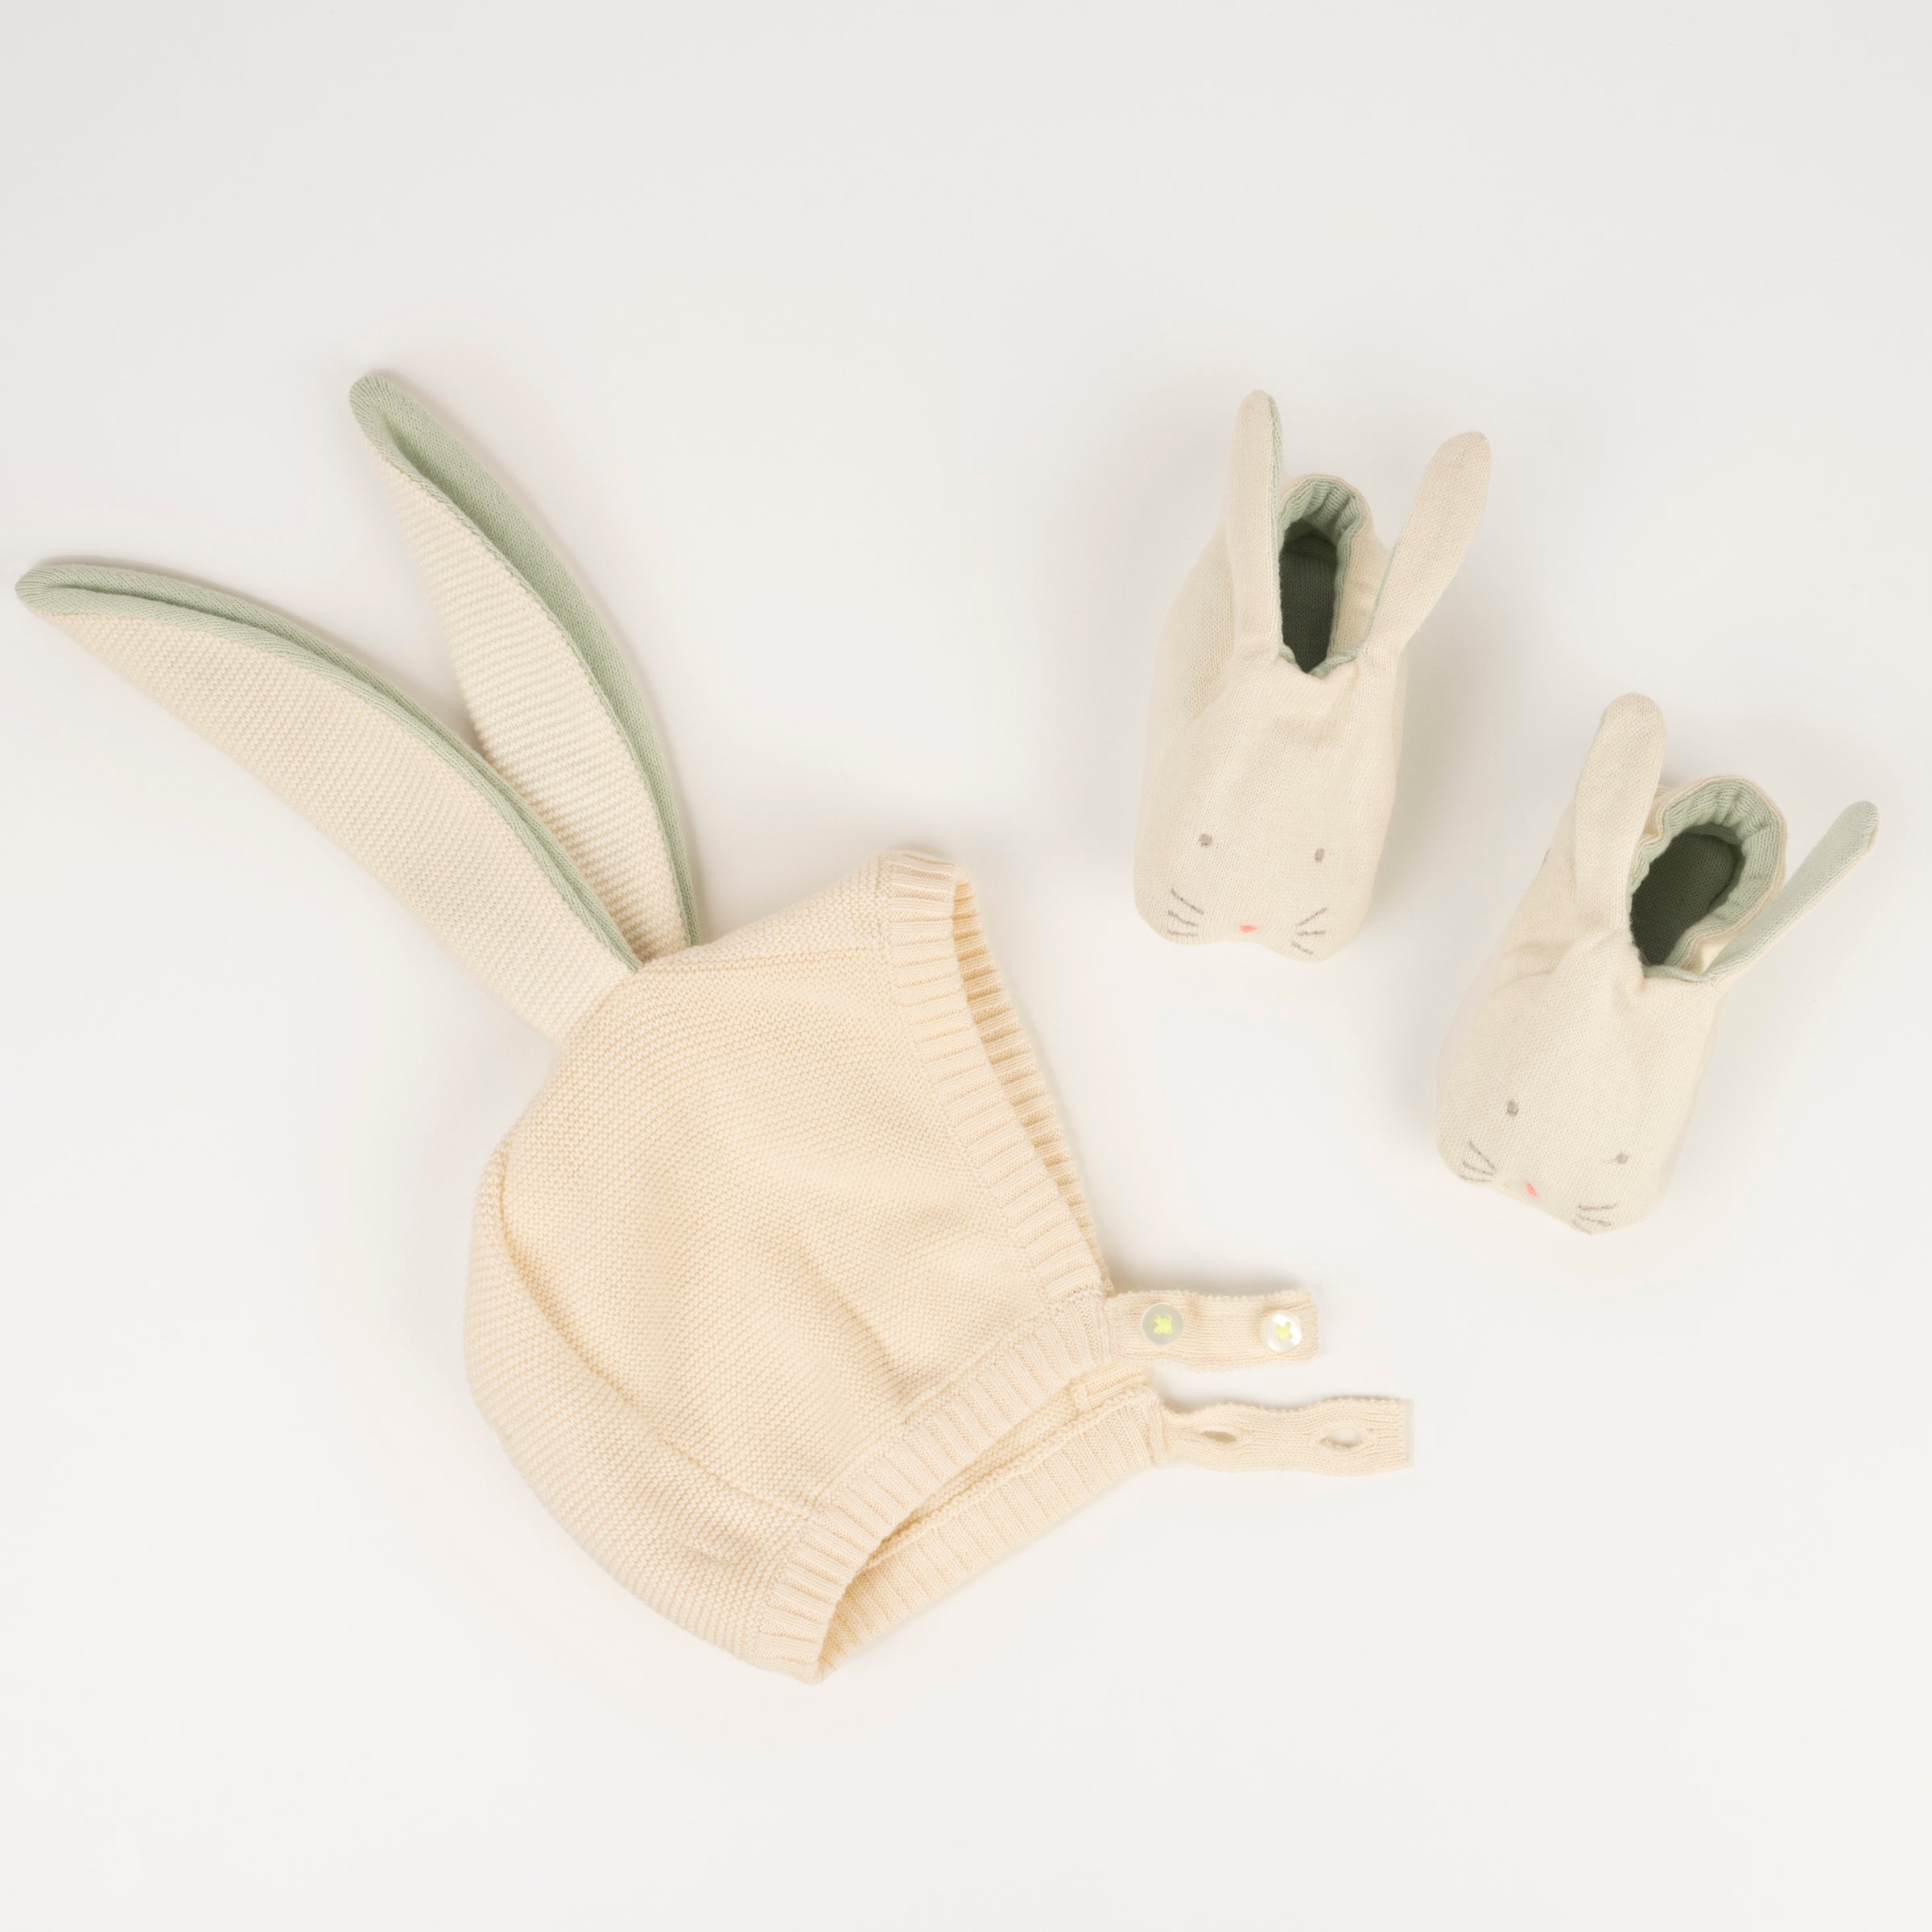 Our baby bonnet and baby booties are part of our organic cotton baby clothes range.